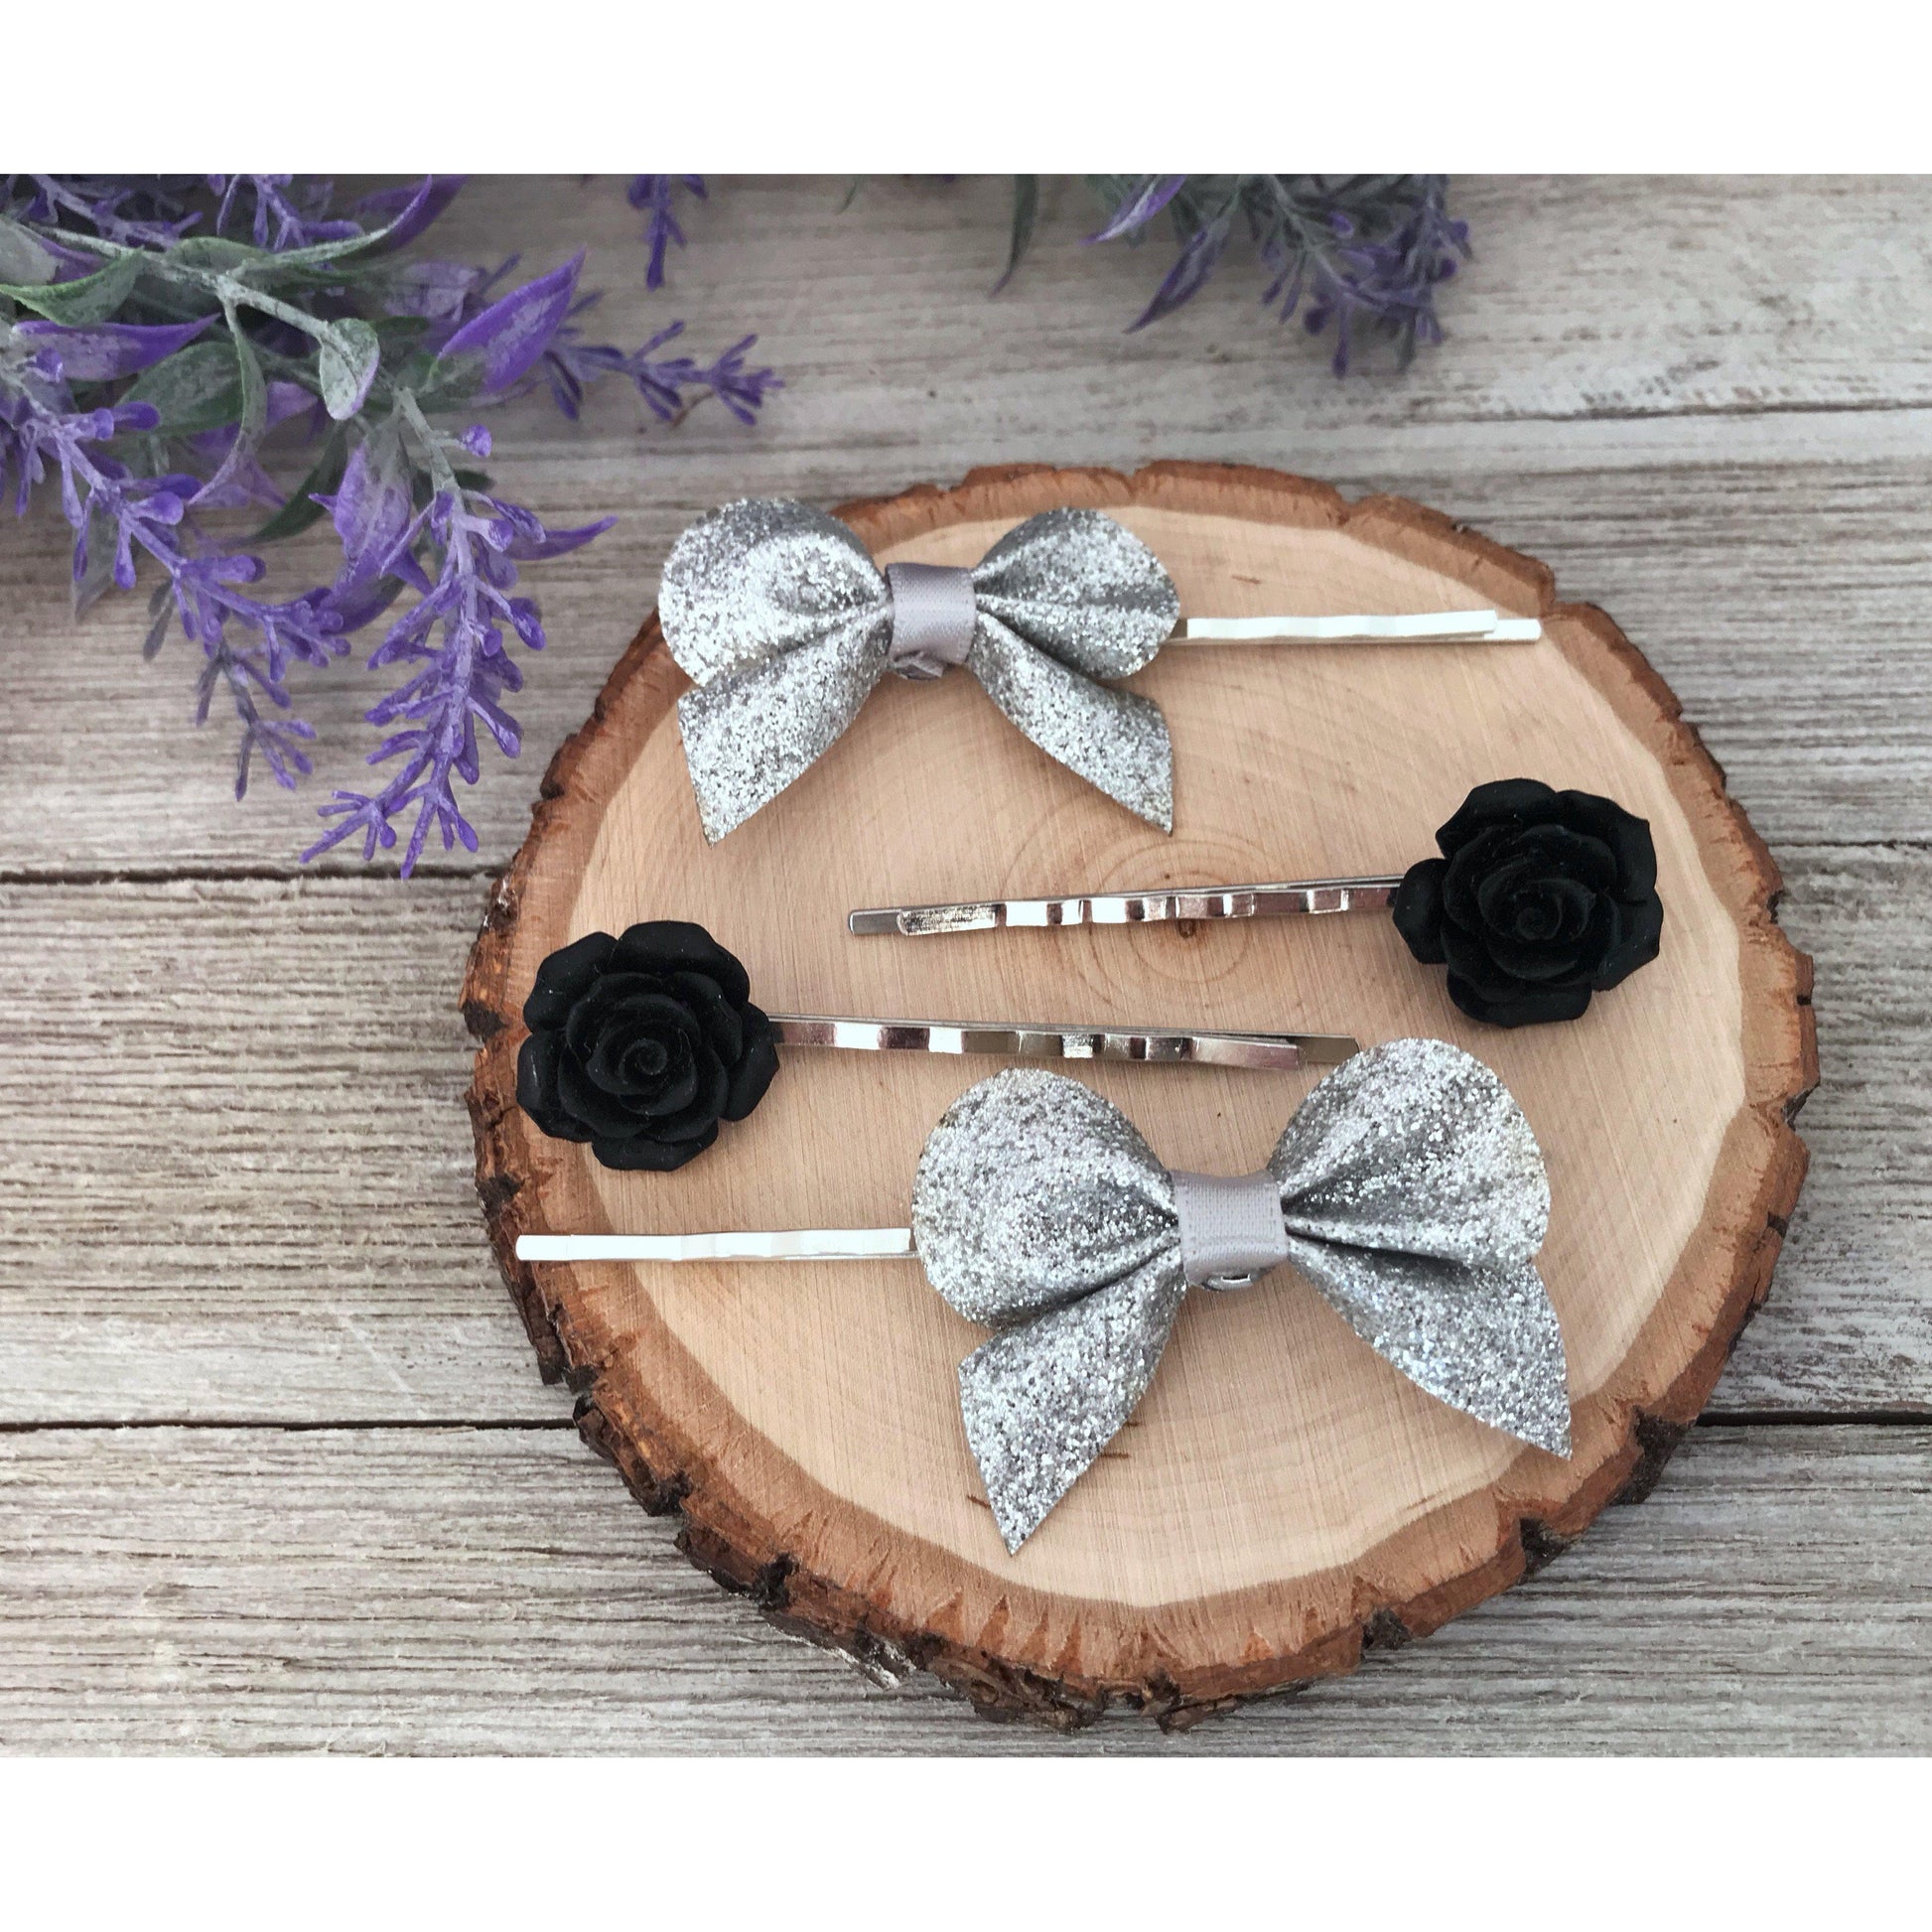 Silver Bow & Black Rose Hair Pin Set: Elegant Accents for Stylish Hairdos